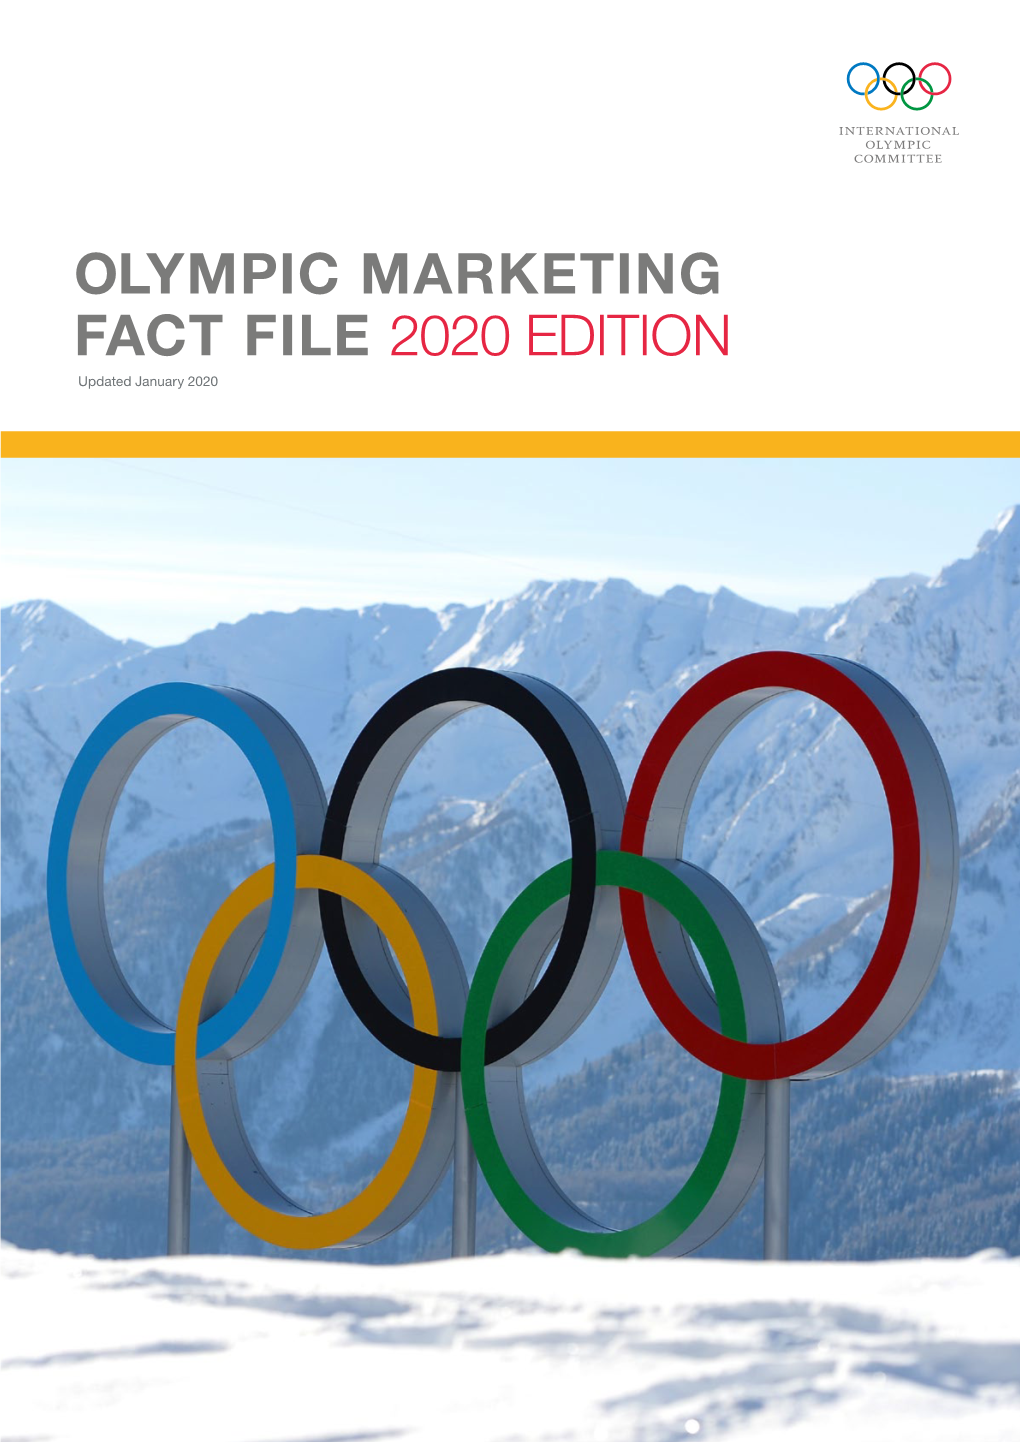 OLYMPIC MARKETING FACT FILE 2020 EDITION Updated January 2020 2 OLYMPIC MARKETING FACT FILE 2020 EDITION